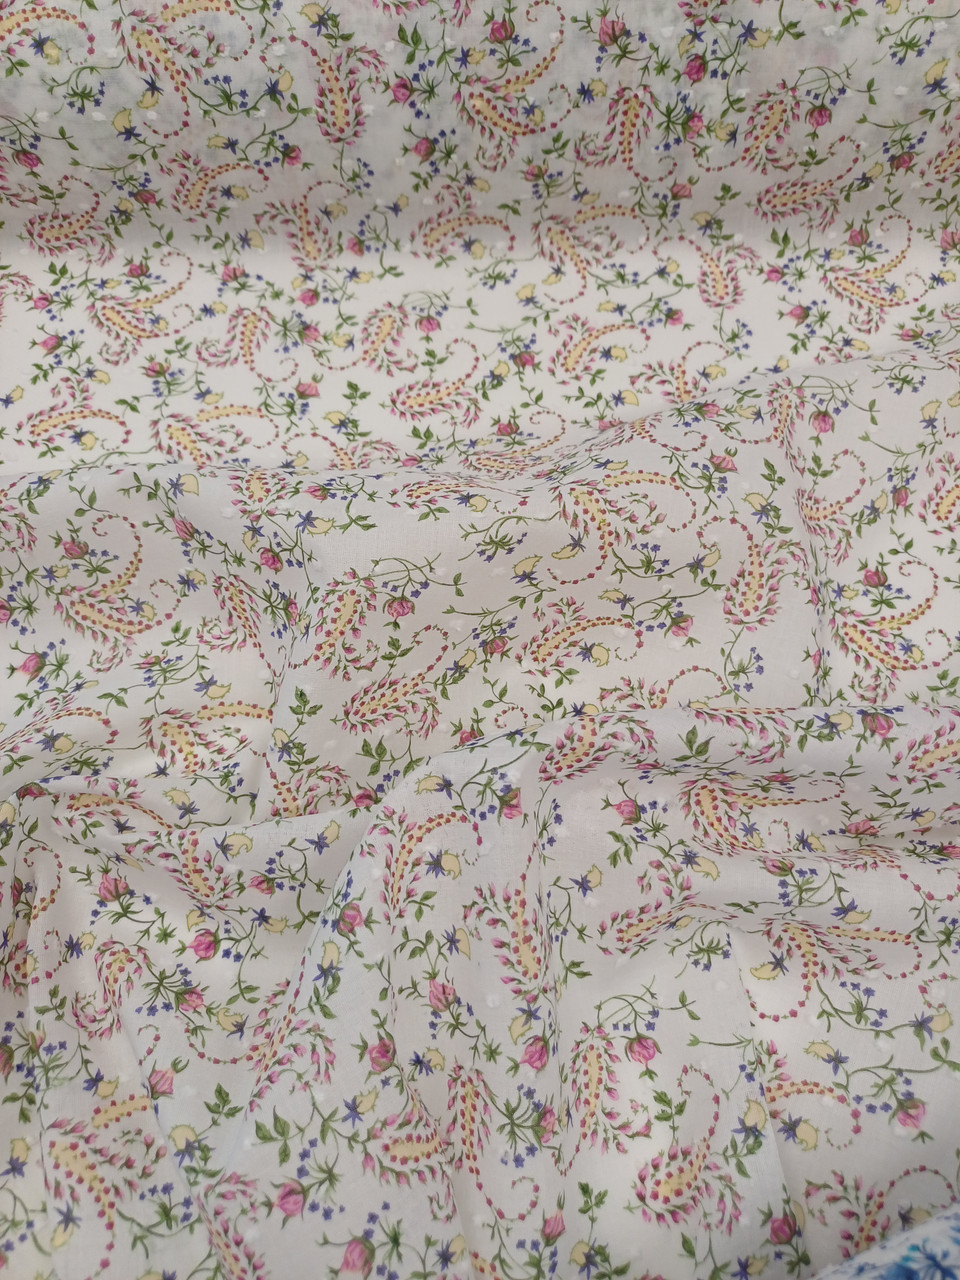 A really pretty floral print cotton, Almost a paisley design in pinks, yellows and purple, 100% cotton, 140 cm wide, Wash at 30 degrees, Ideal for shirts, dresses and more, Priced per metre 